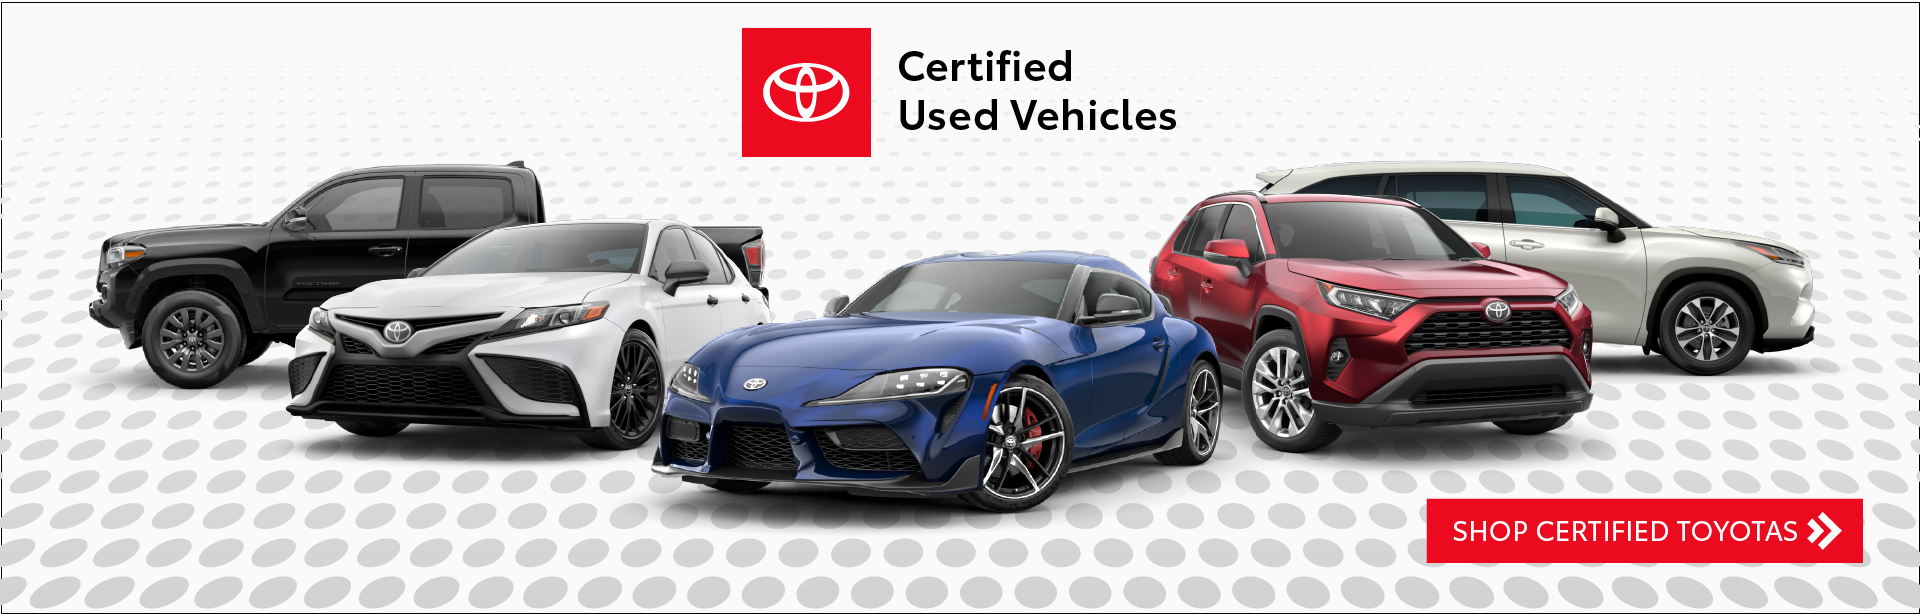 Certified Used Vehicles 